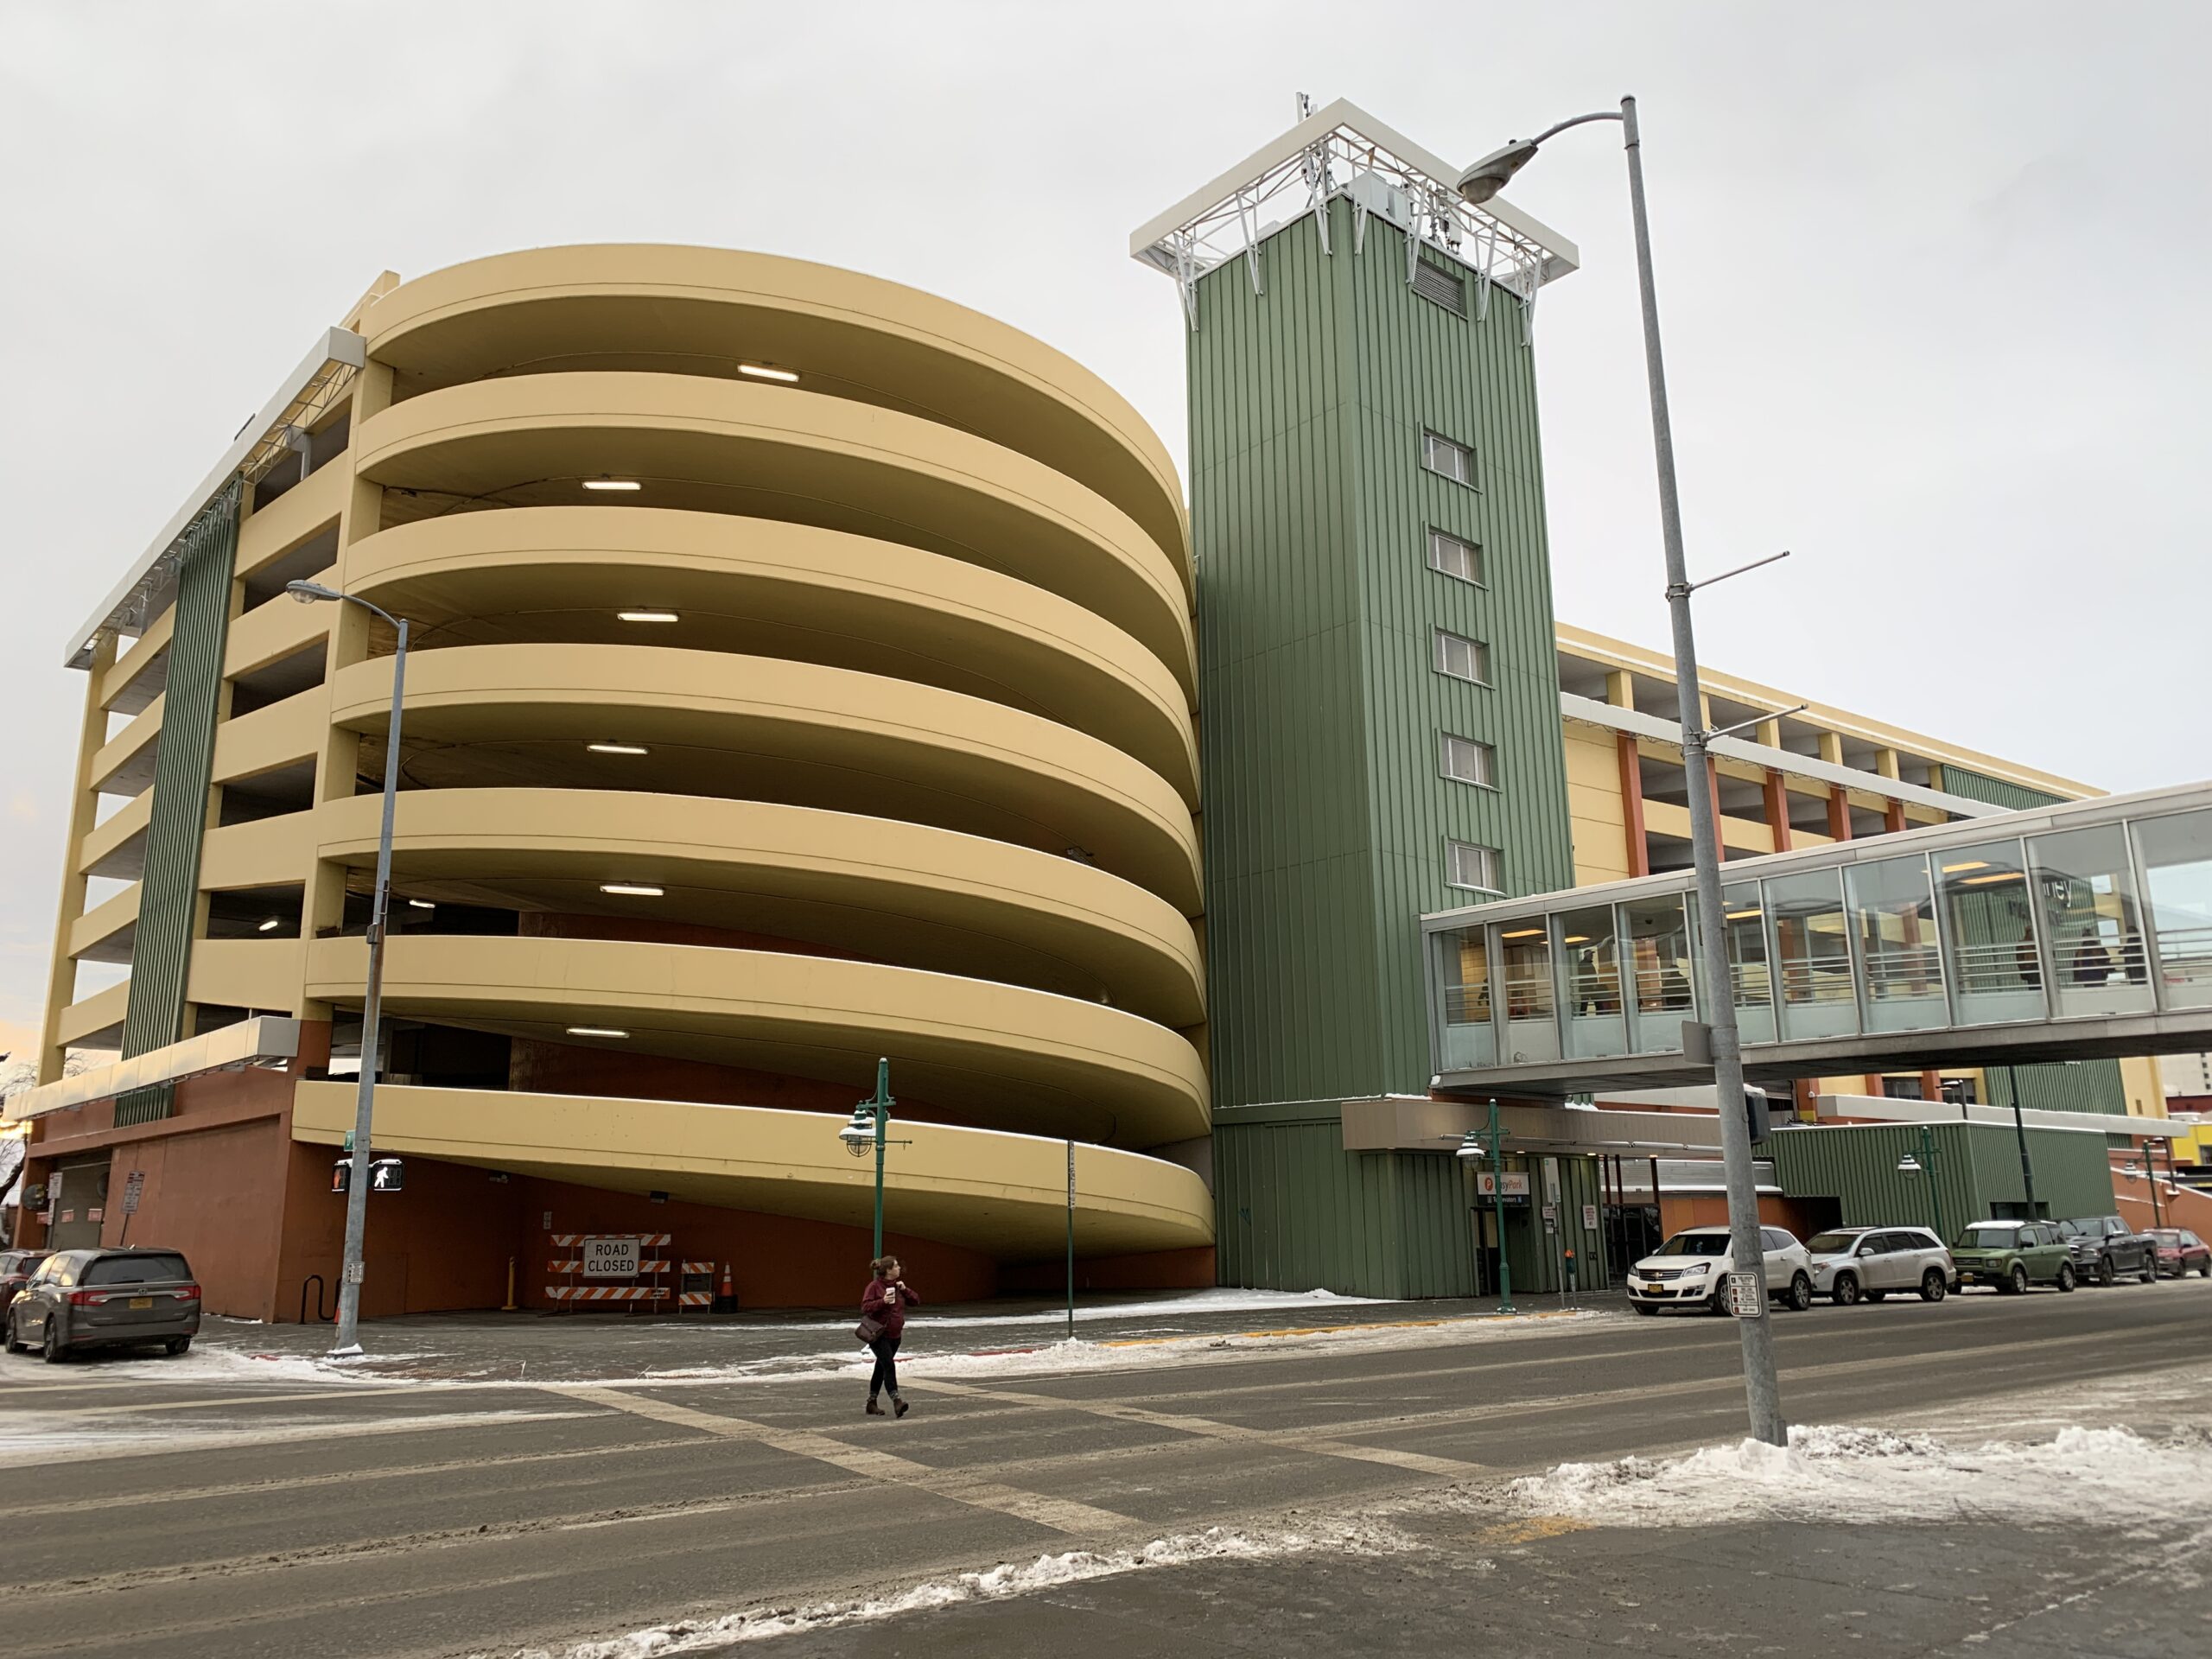 The JC Penney parking garage: An interim transit center we can use.